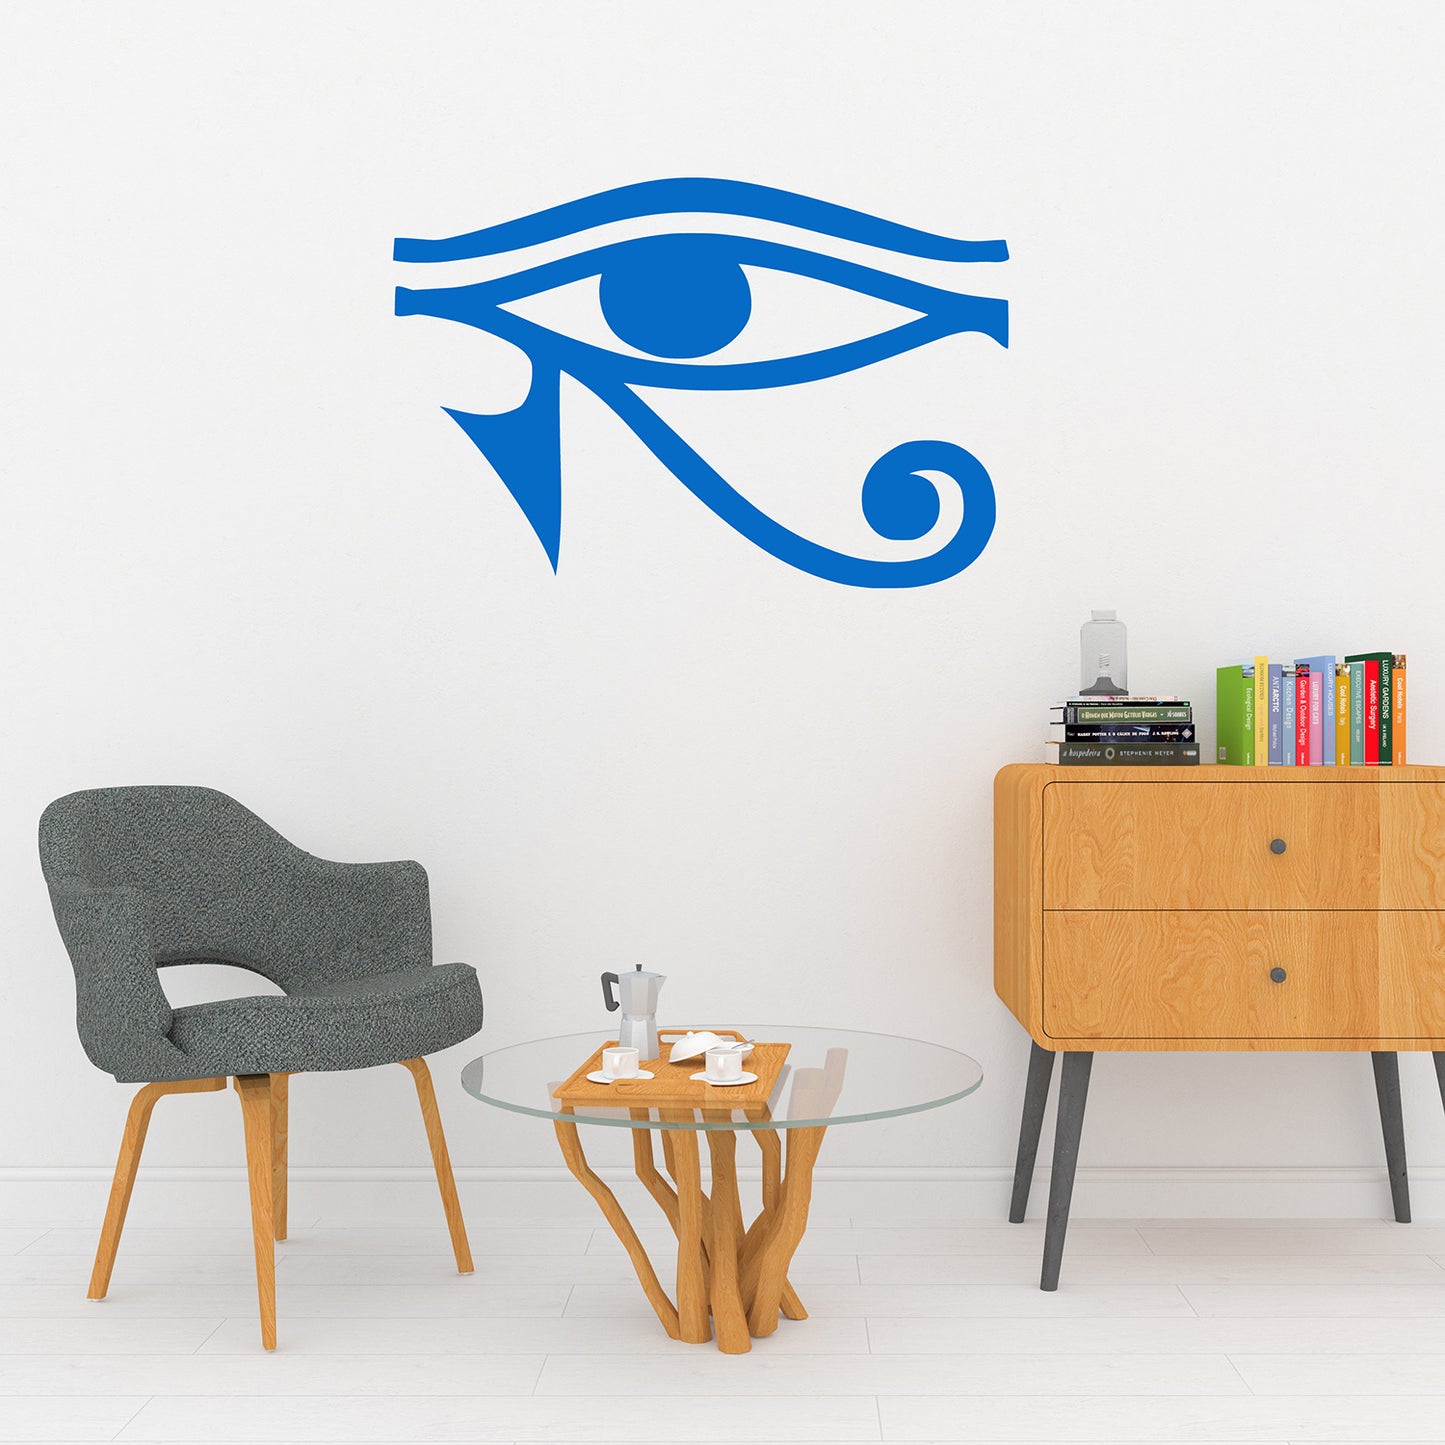 The eye of Horus | Wall decal